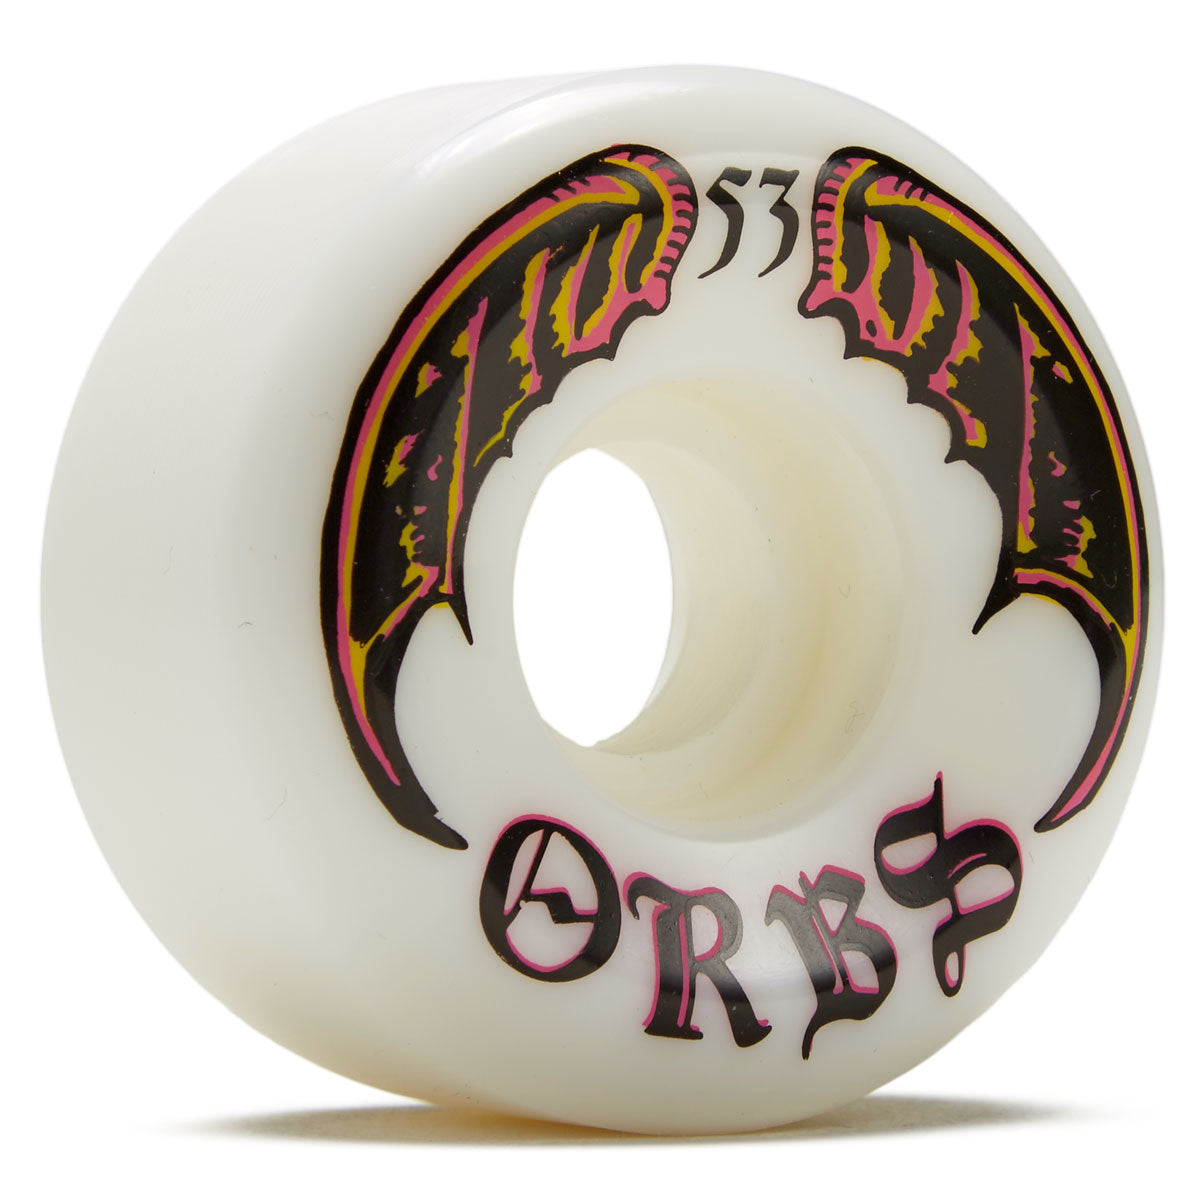 Welcome Orbs Specters Conical 99A Skateboard Wheels - White - 53mm image 1